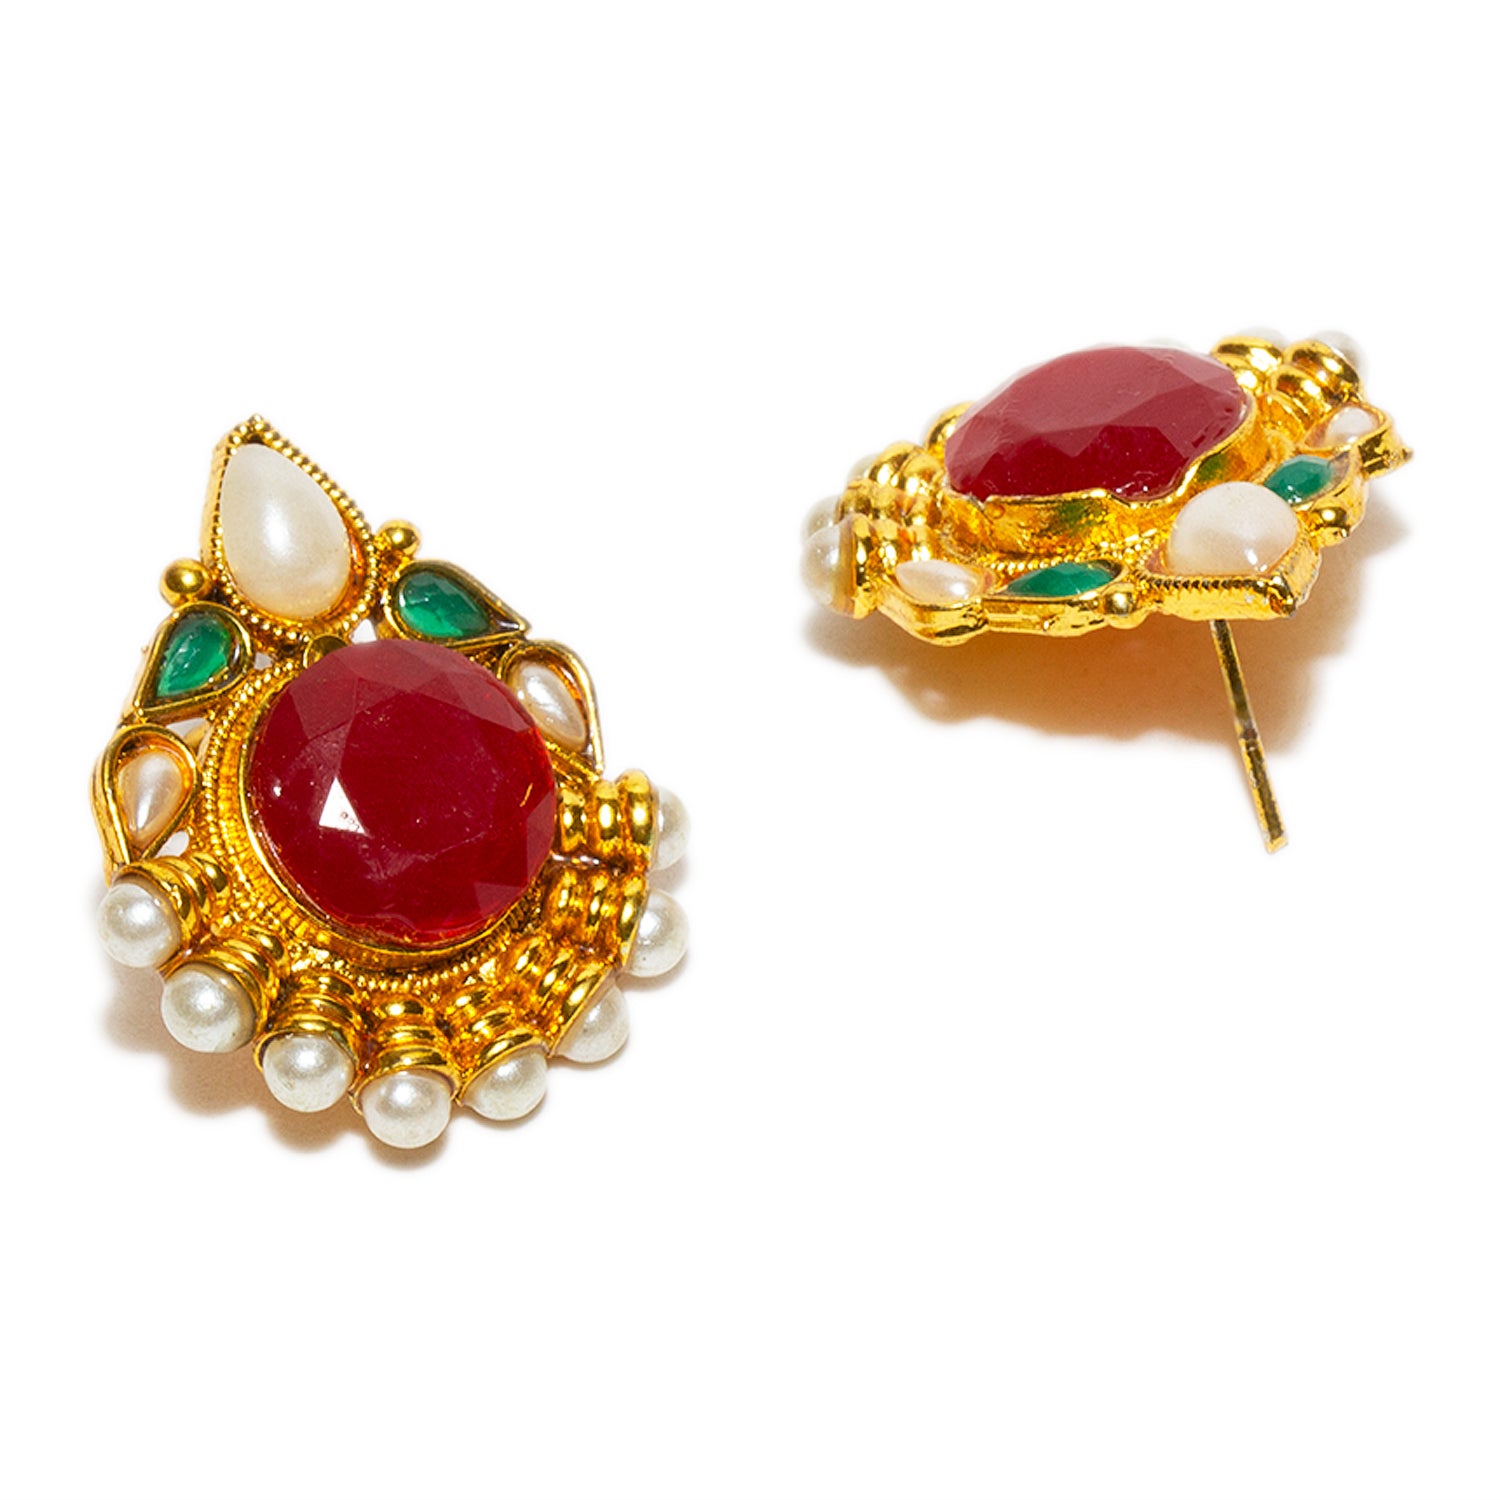 22K Gold Earrings For Women with Pearls & Corals - 235-GER16190 in 12.750  Grams